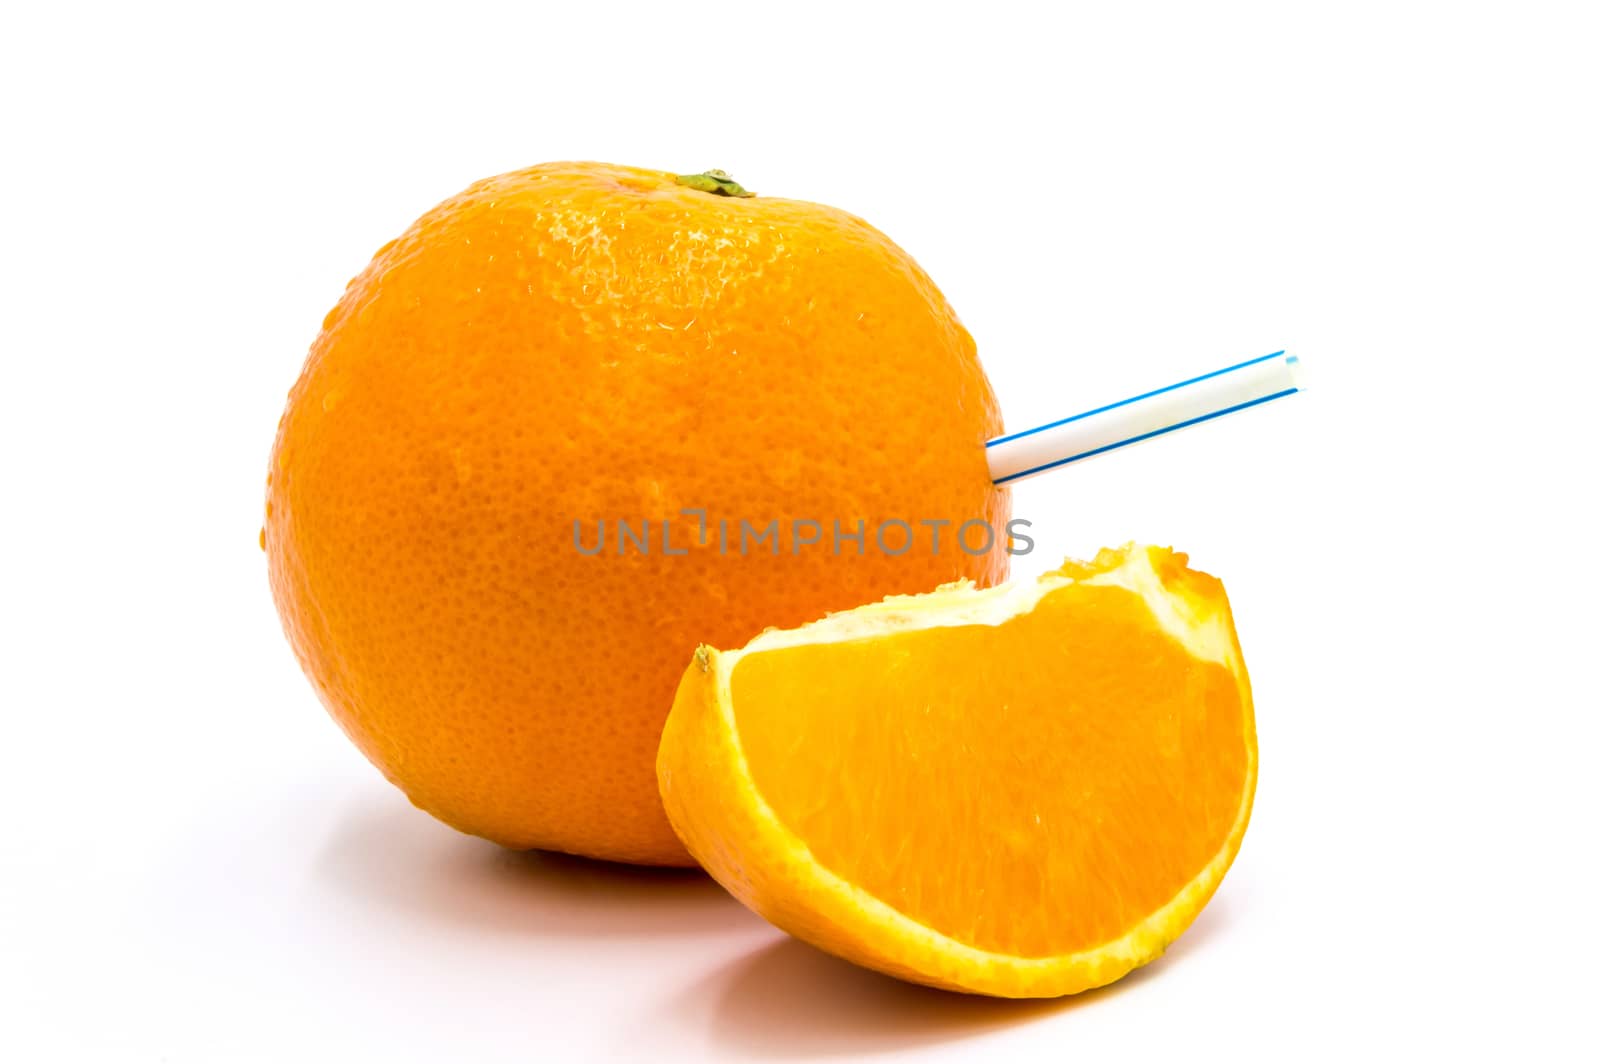 Close-up of drinking straw on an orange wedge against on a white background